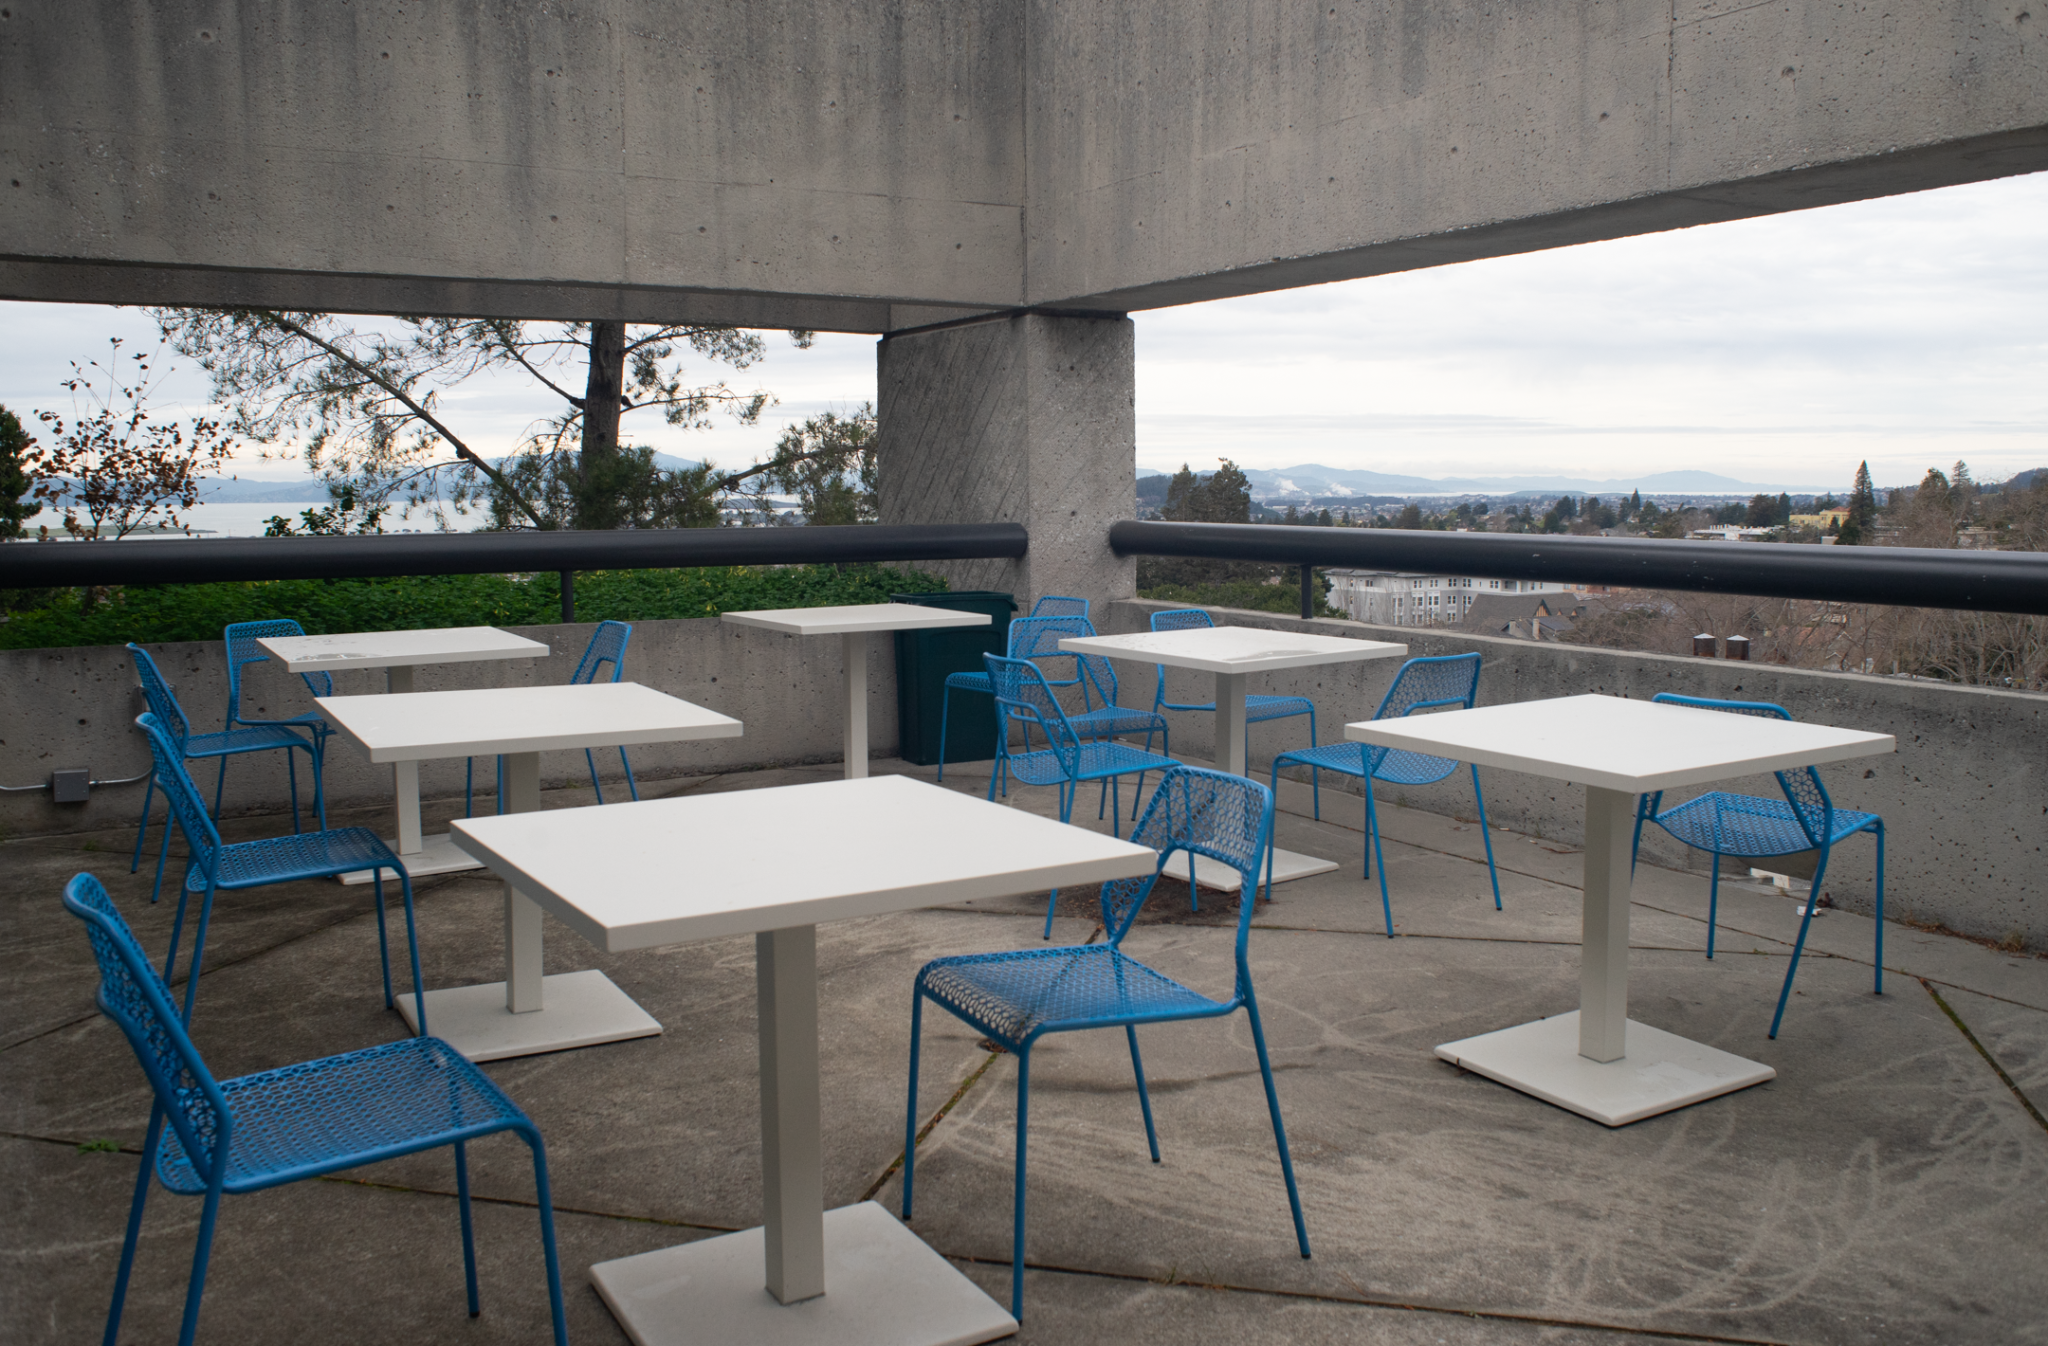 Tables and chairs arranged around the outdoor terrace of Mudd Hall